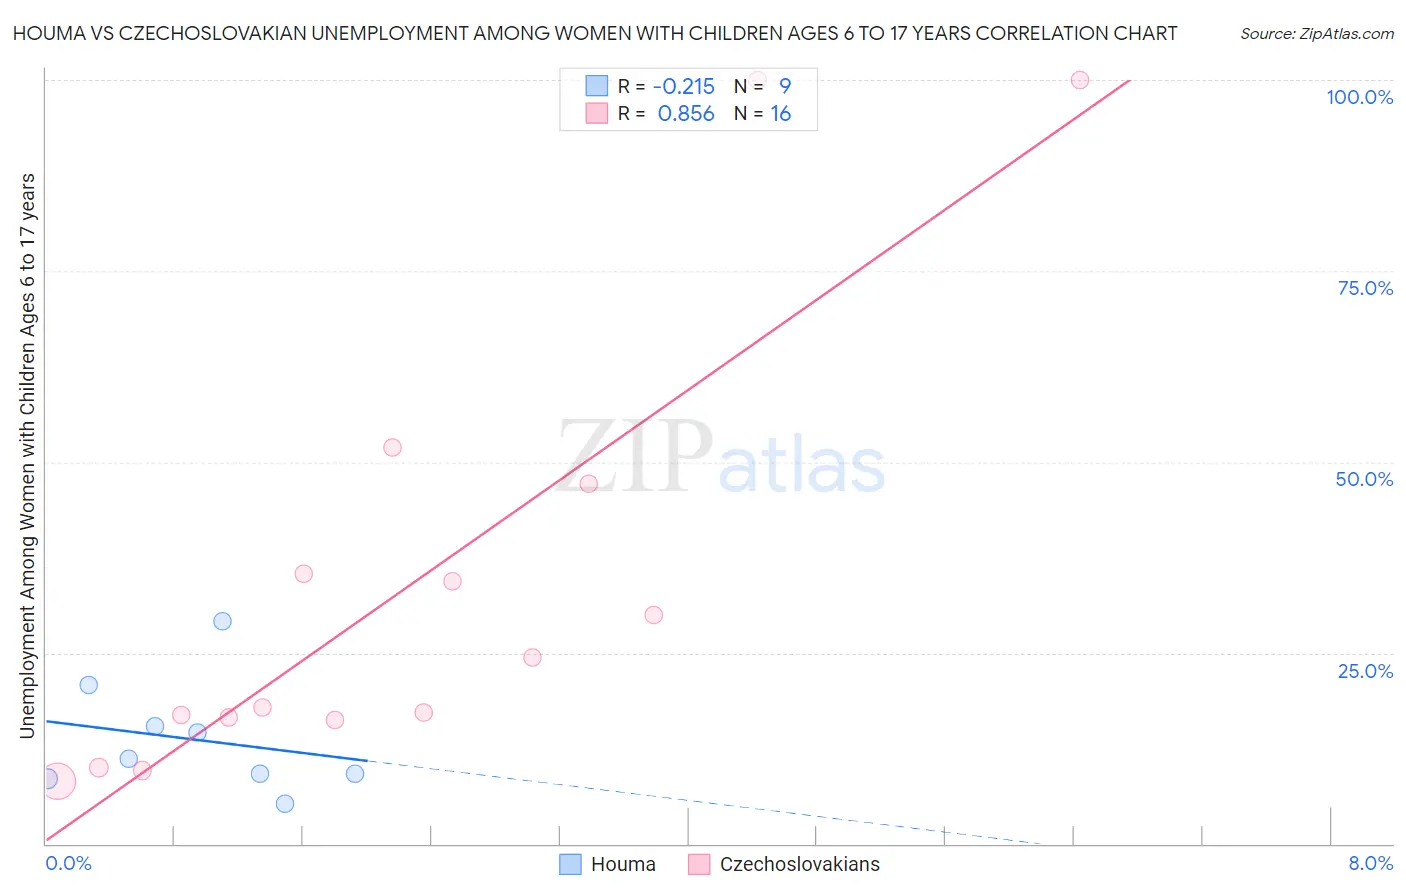 Houma vs Czechoslovakian Unemployment Among Women with Children Ages 6 to 17 years